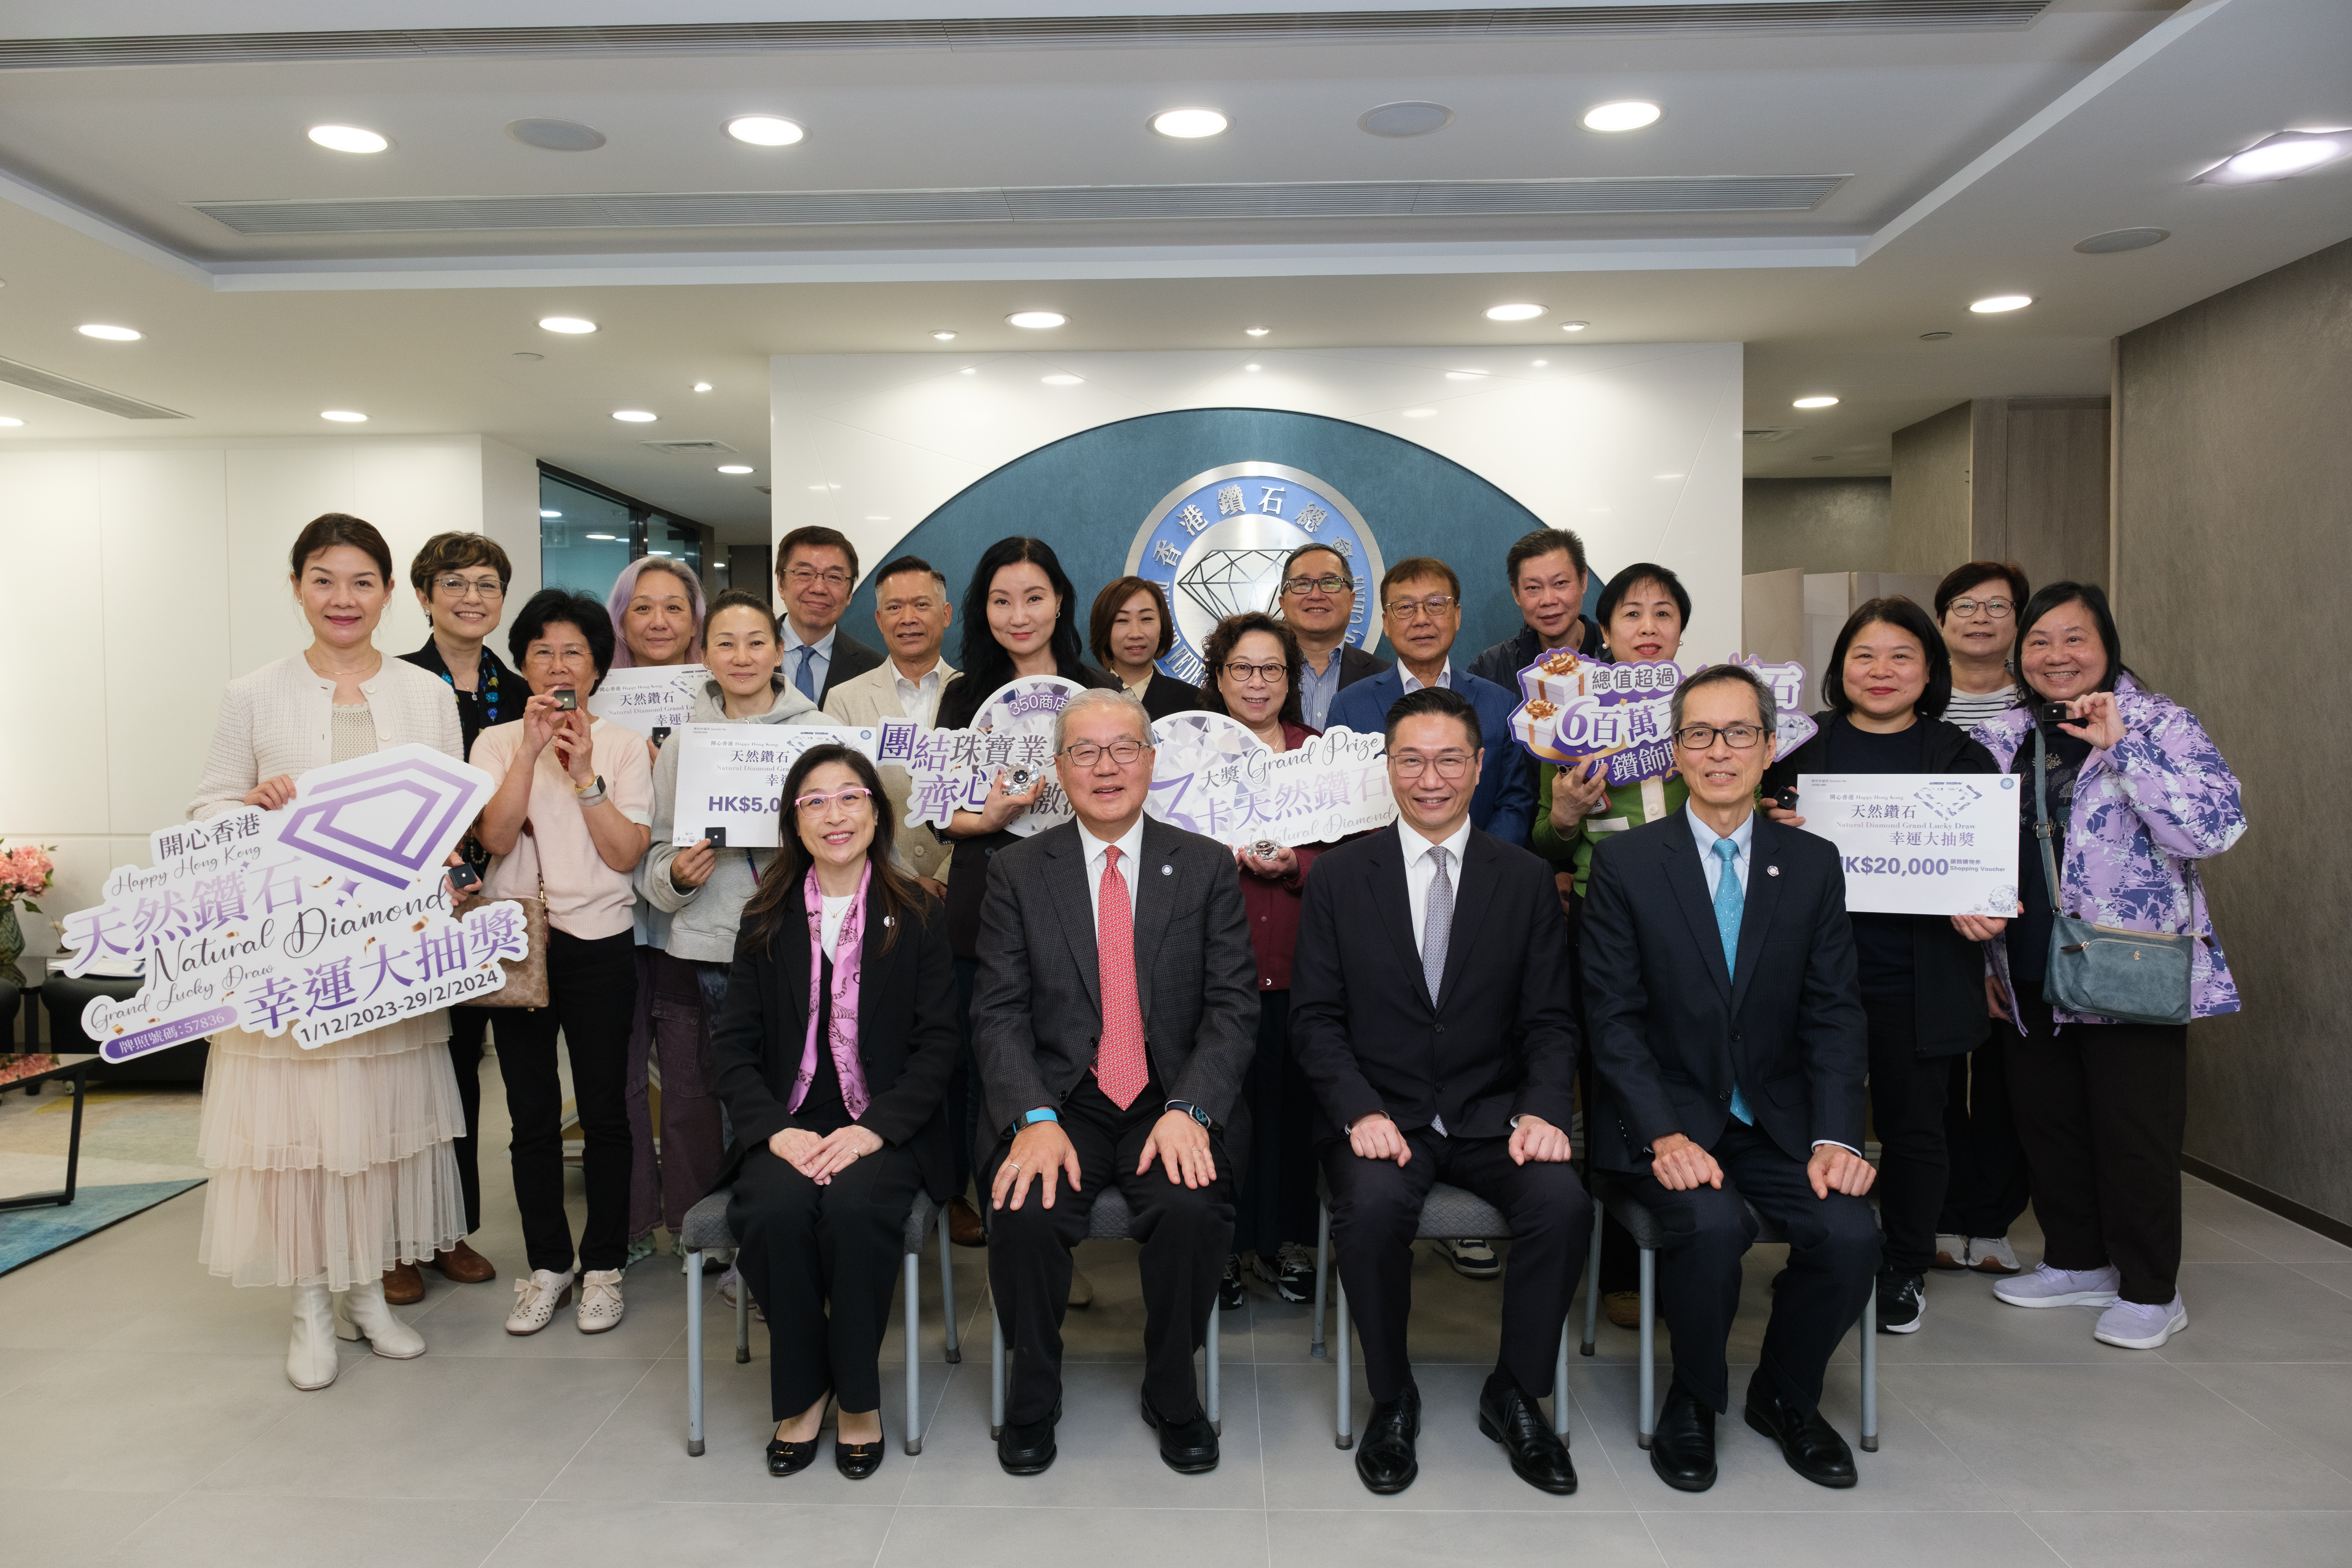 Members of the Diamond Federation of Hong Kong, together with Legislative Council member (Wholesale and Retail) Mr. SHIU Ka-fai, JP, awarded natural diamonds and diamond jewellery shopping vouchers with a total value exceeding HKD 6 million to various lucky recipients.